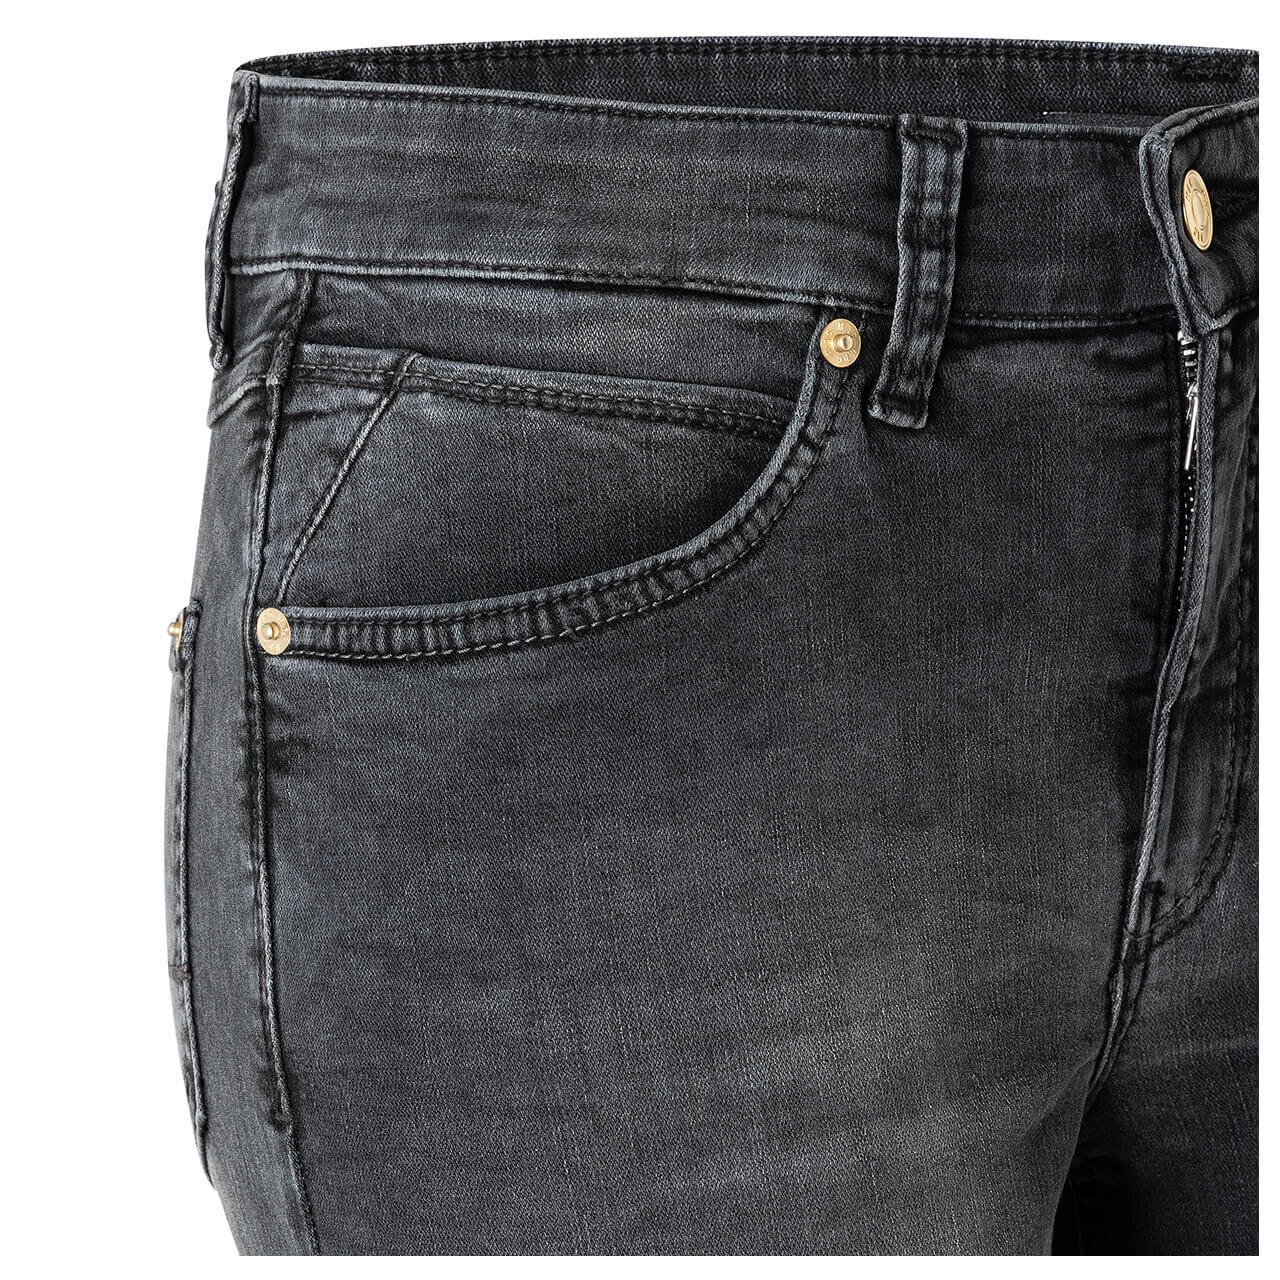 MAC Melanie Jeans fancy anthracite washed